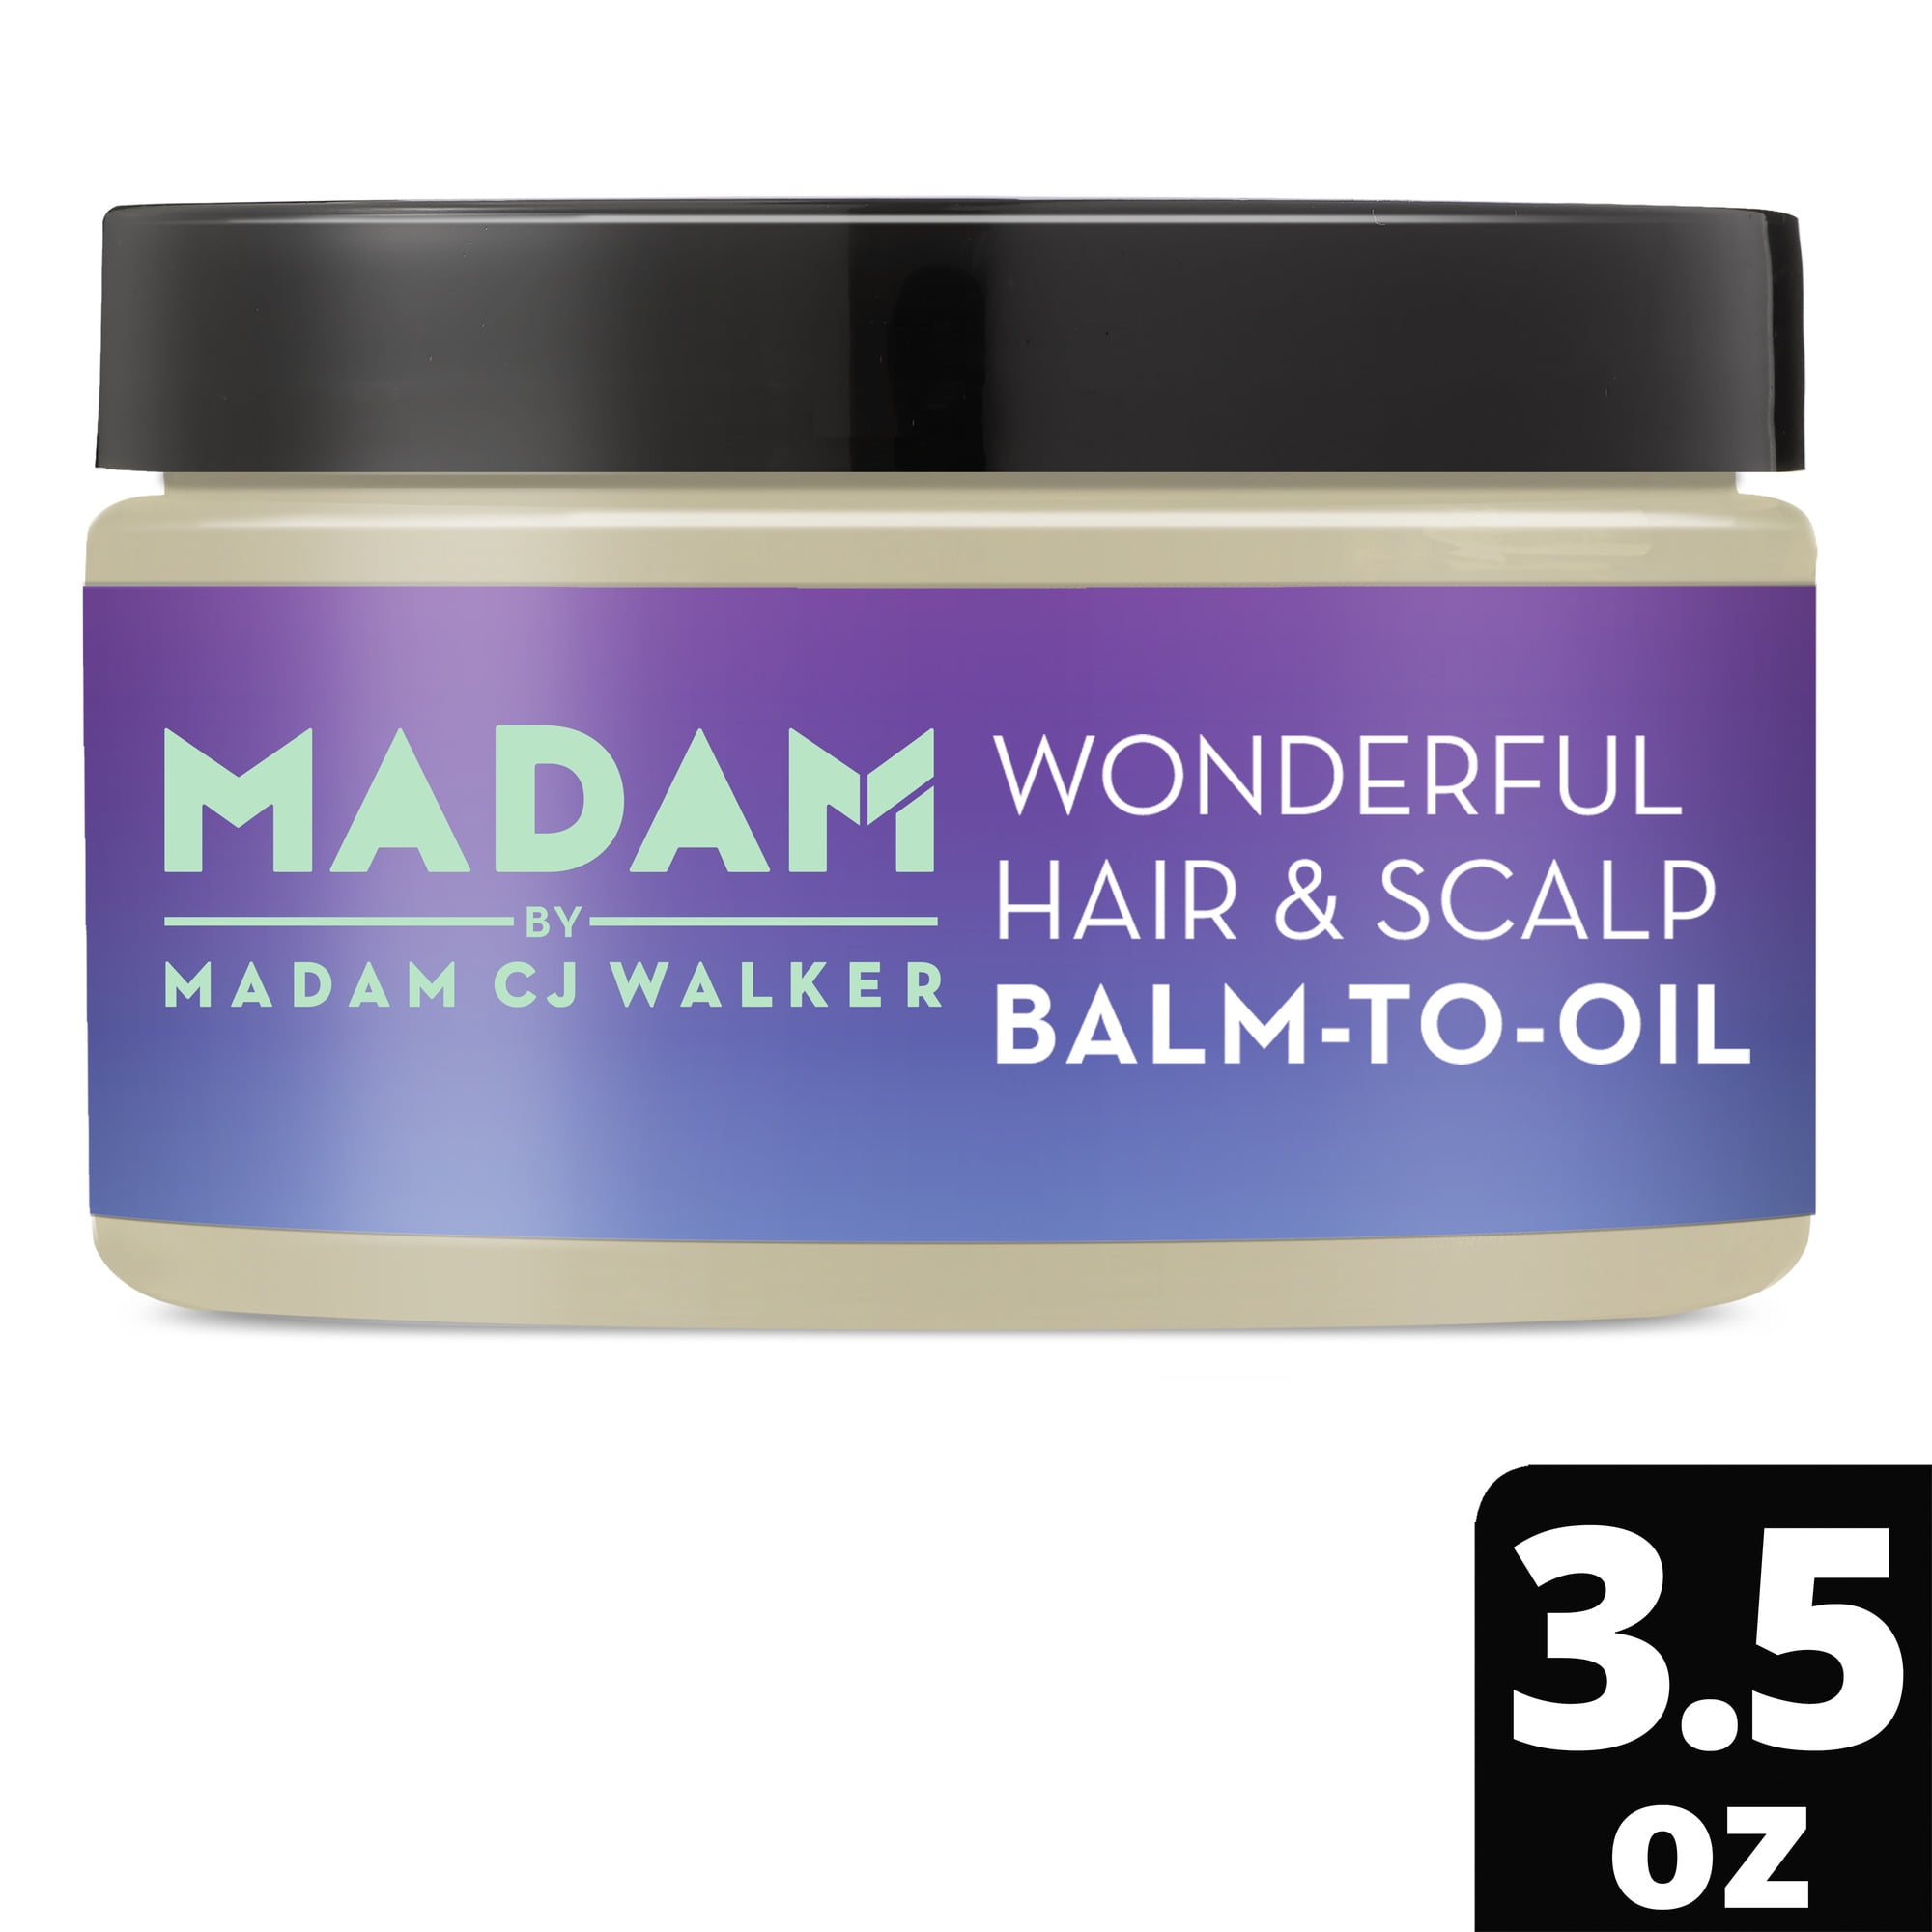 Melodieus stikstof Geweldig MCJW Wonderful Hair and Scalp Balm-to-Oil, for Curly, Straight and  Protective Style 3.5 oz - Walmart.com